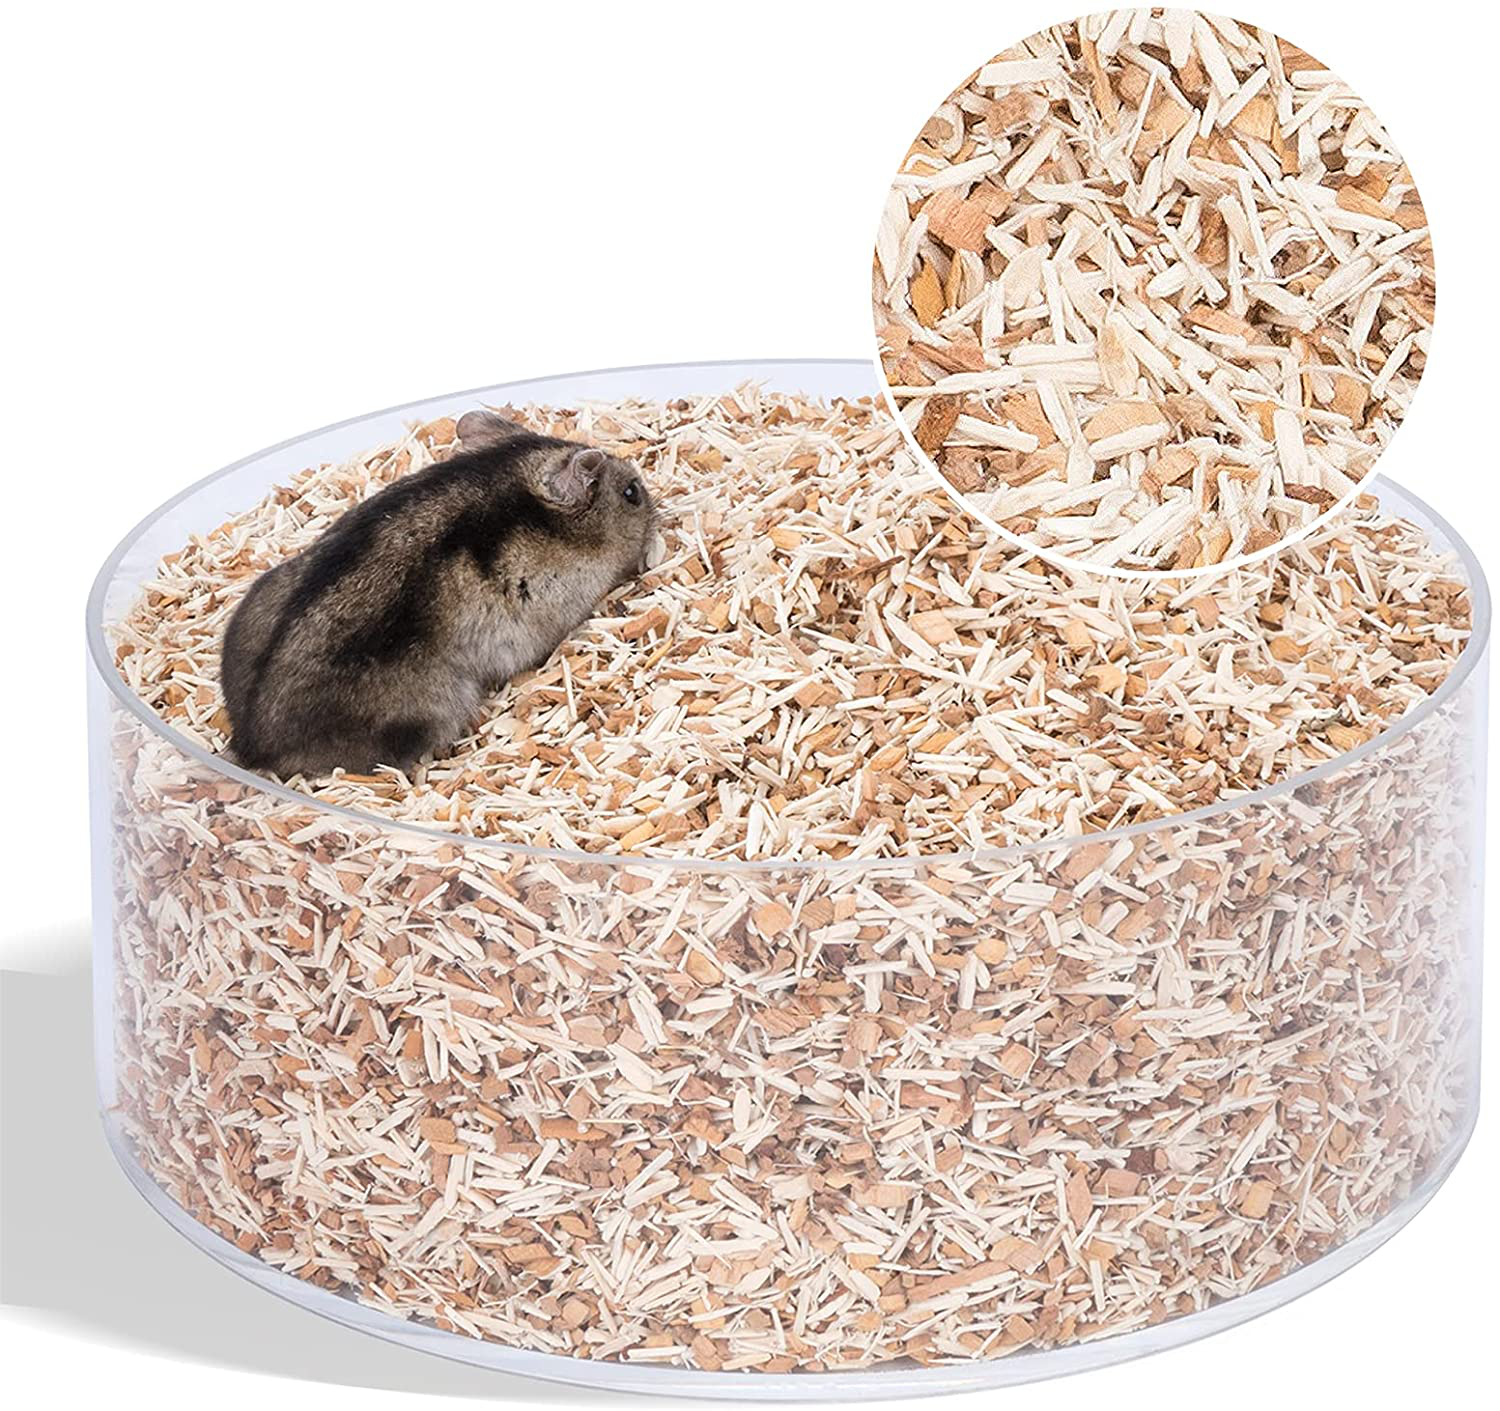 Niteangel Natural & Soft Hamster Bedding for Syrian Dwarf Hamsters Gerbils Mice Degus or Other Small-Sized Pet